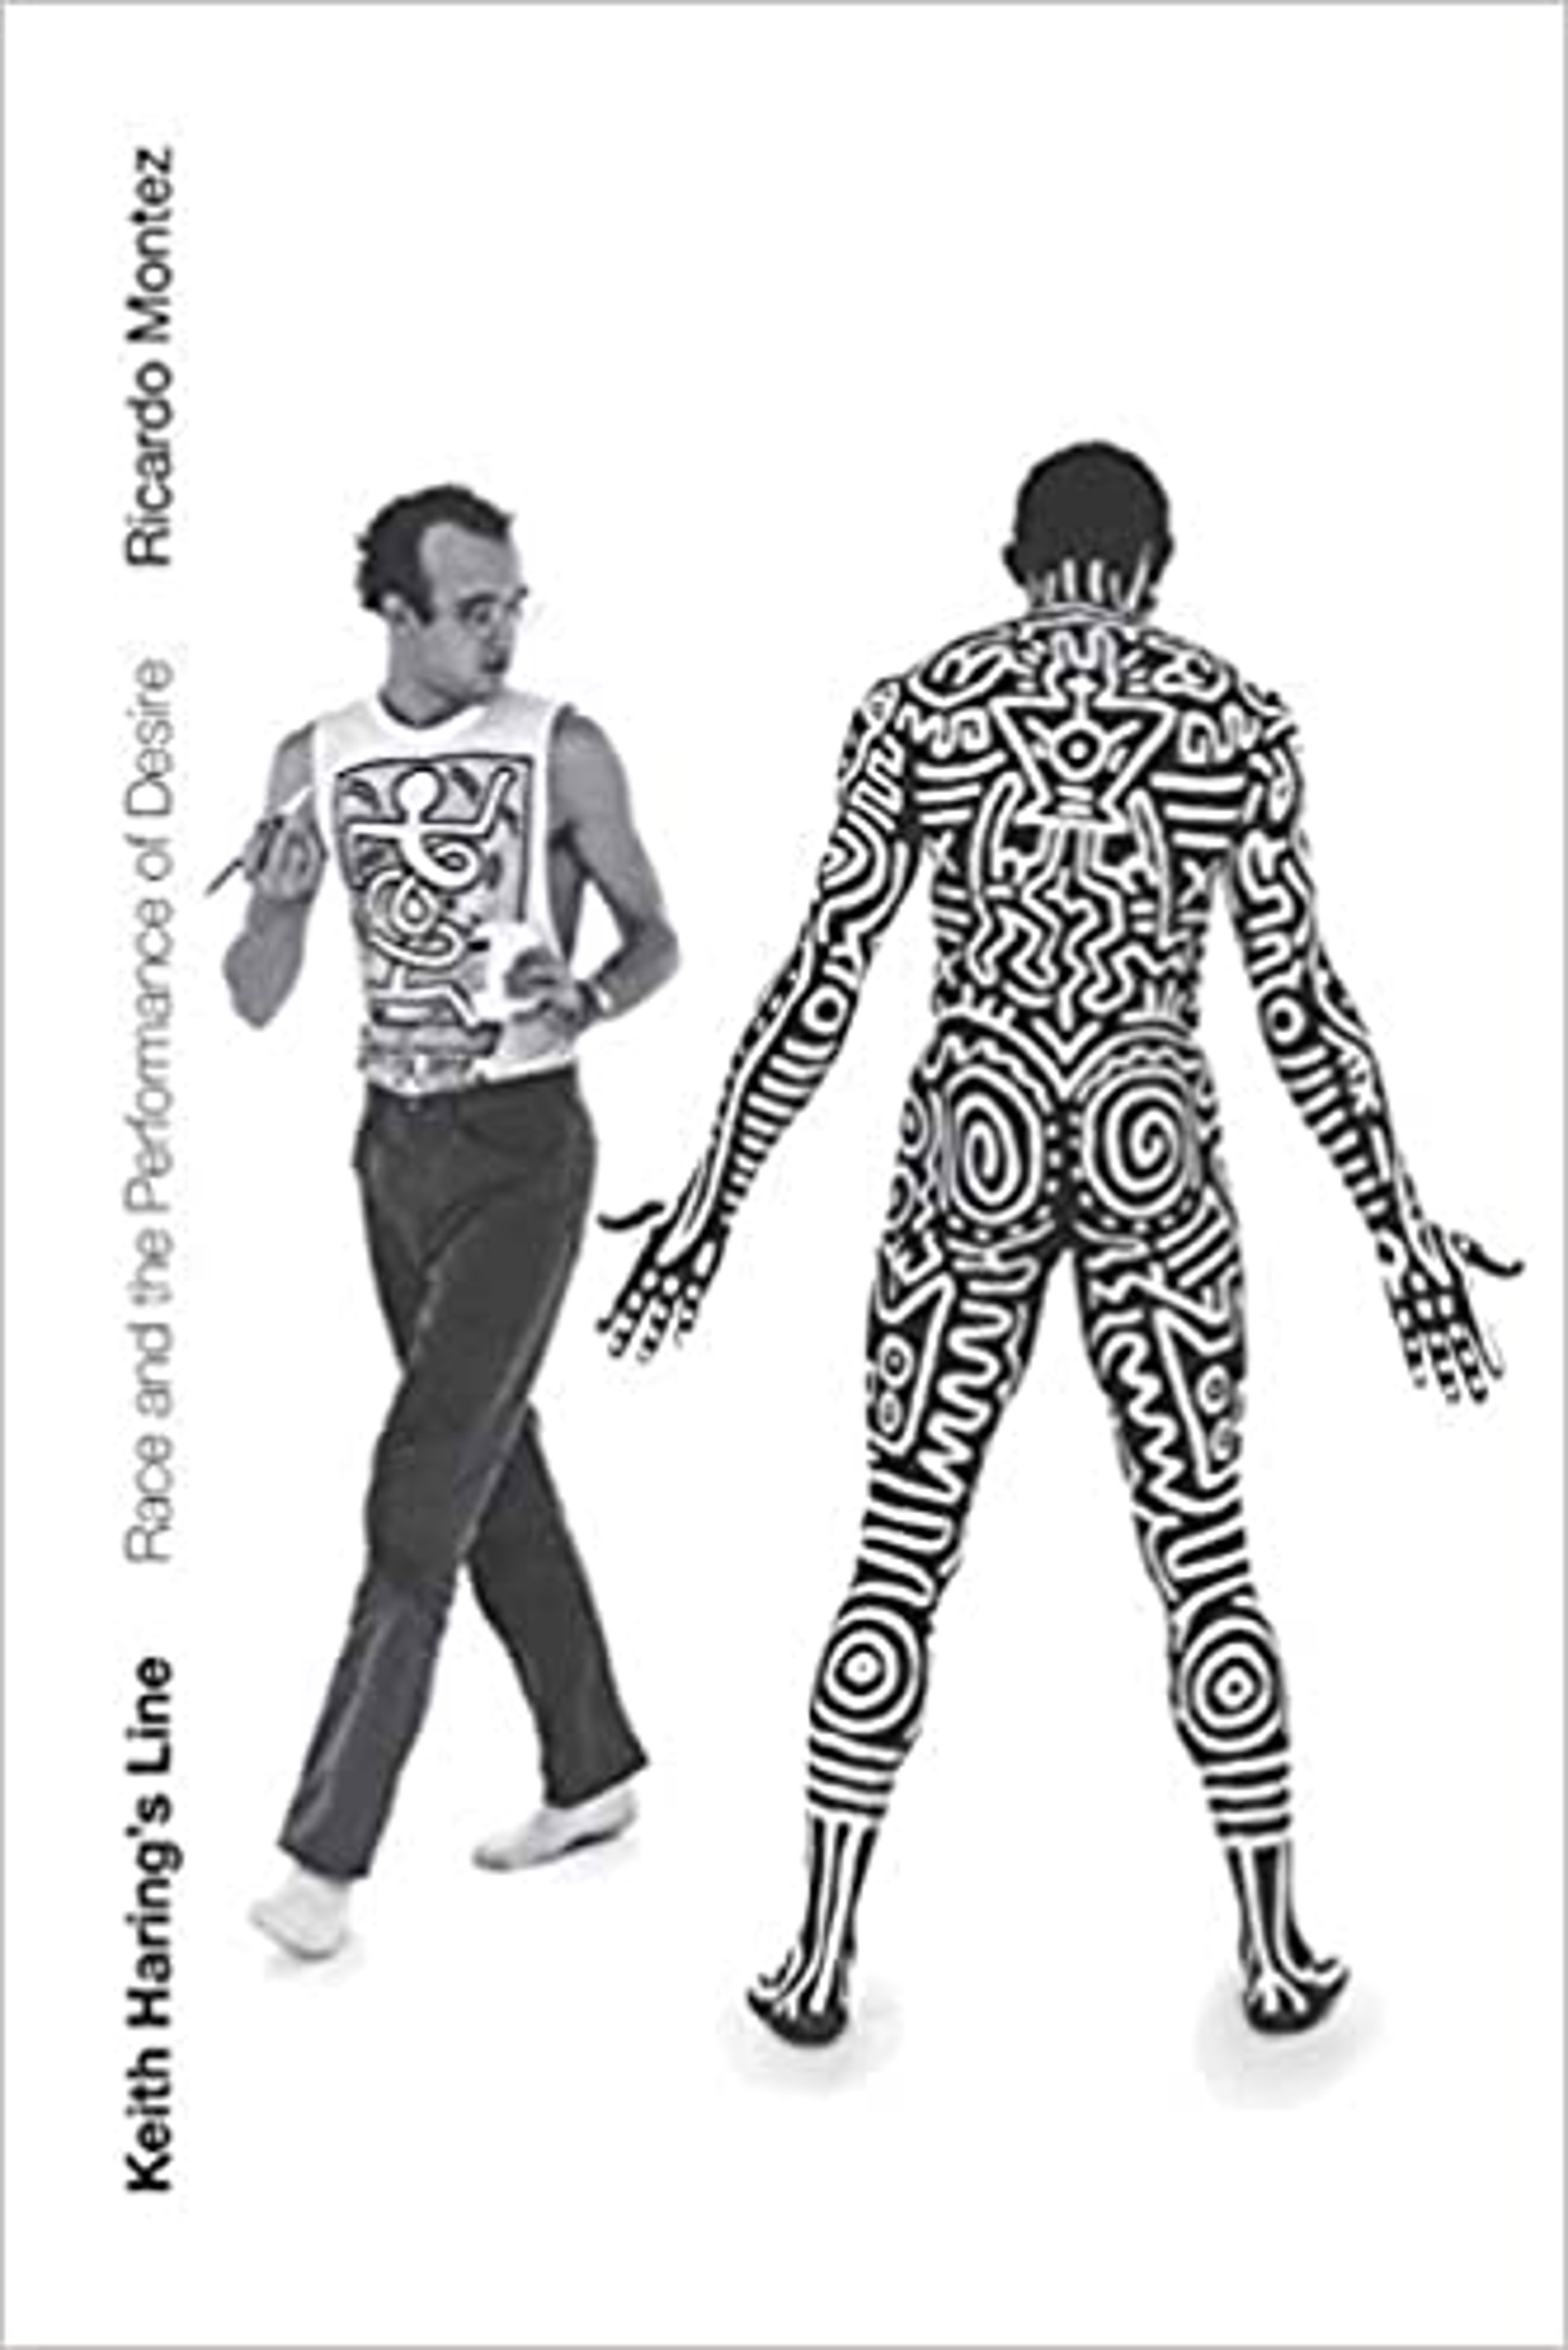 Keith Haring's Line: Race and the Performance of Desire by Keith Haring